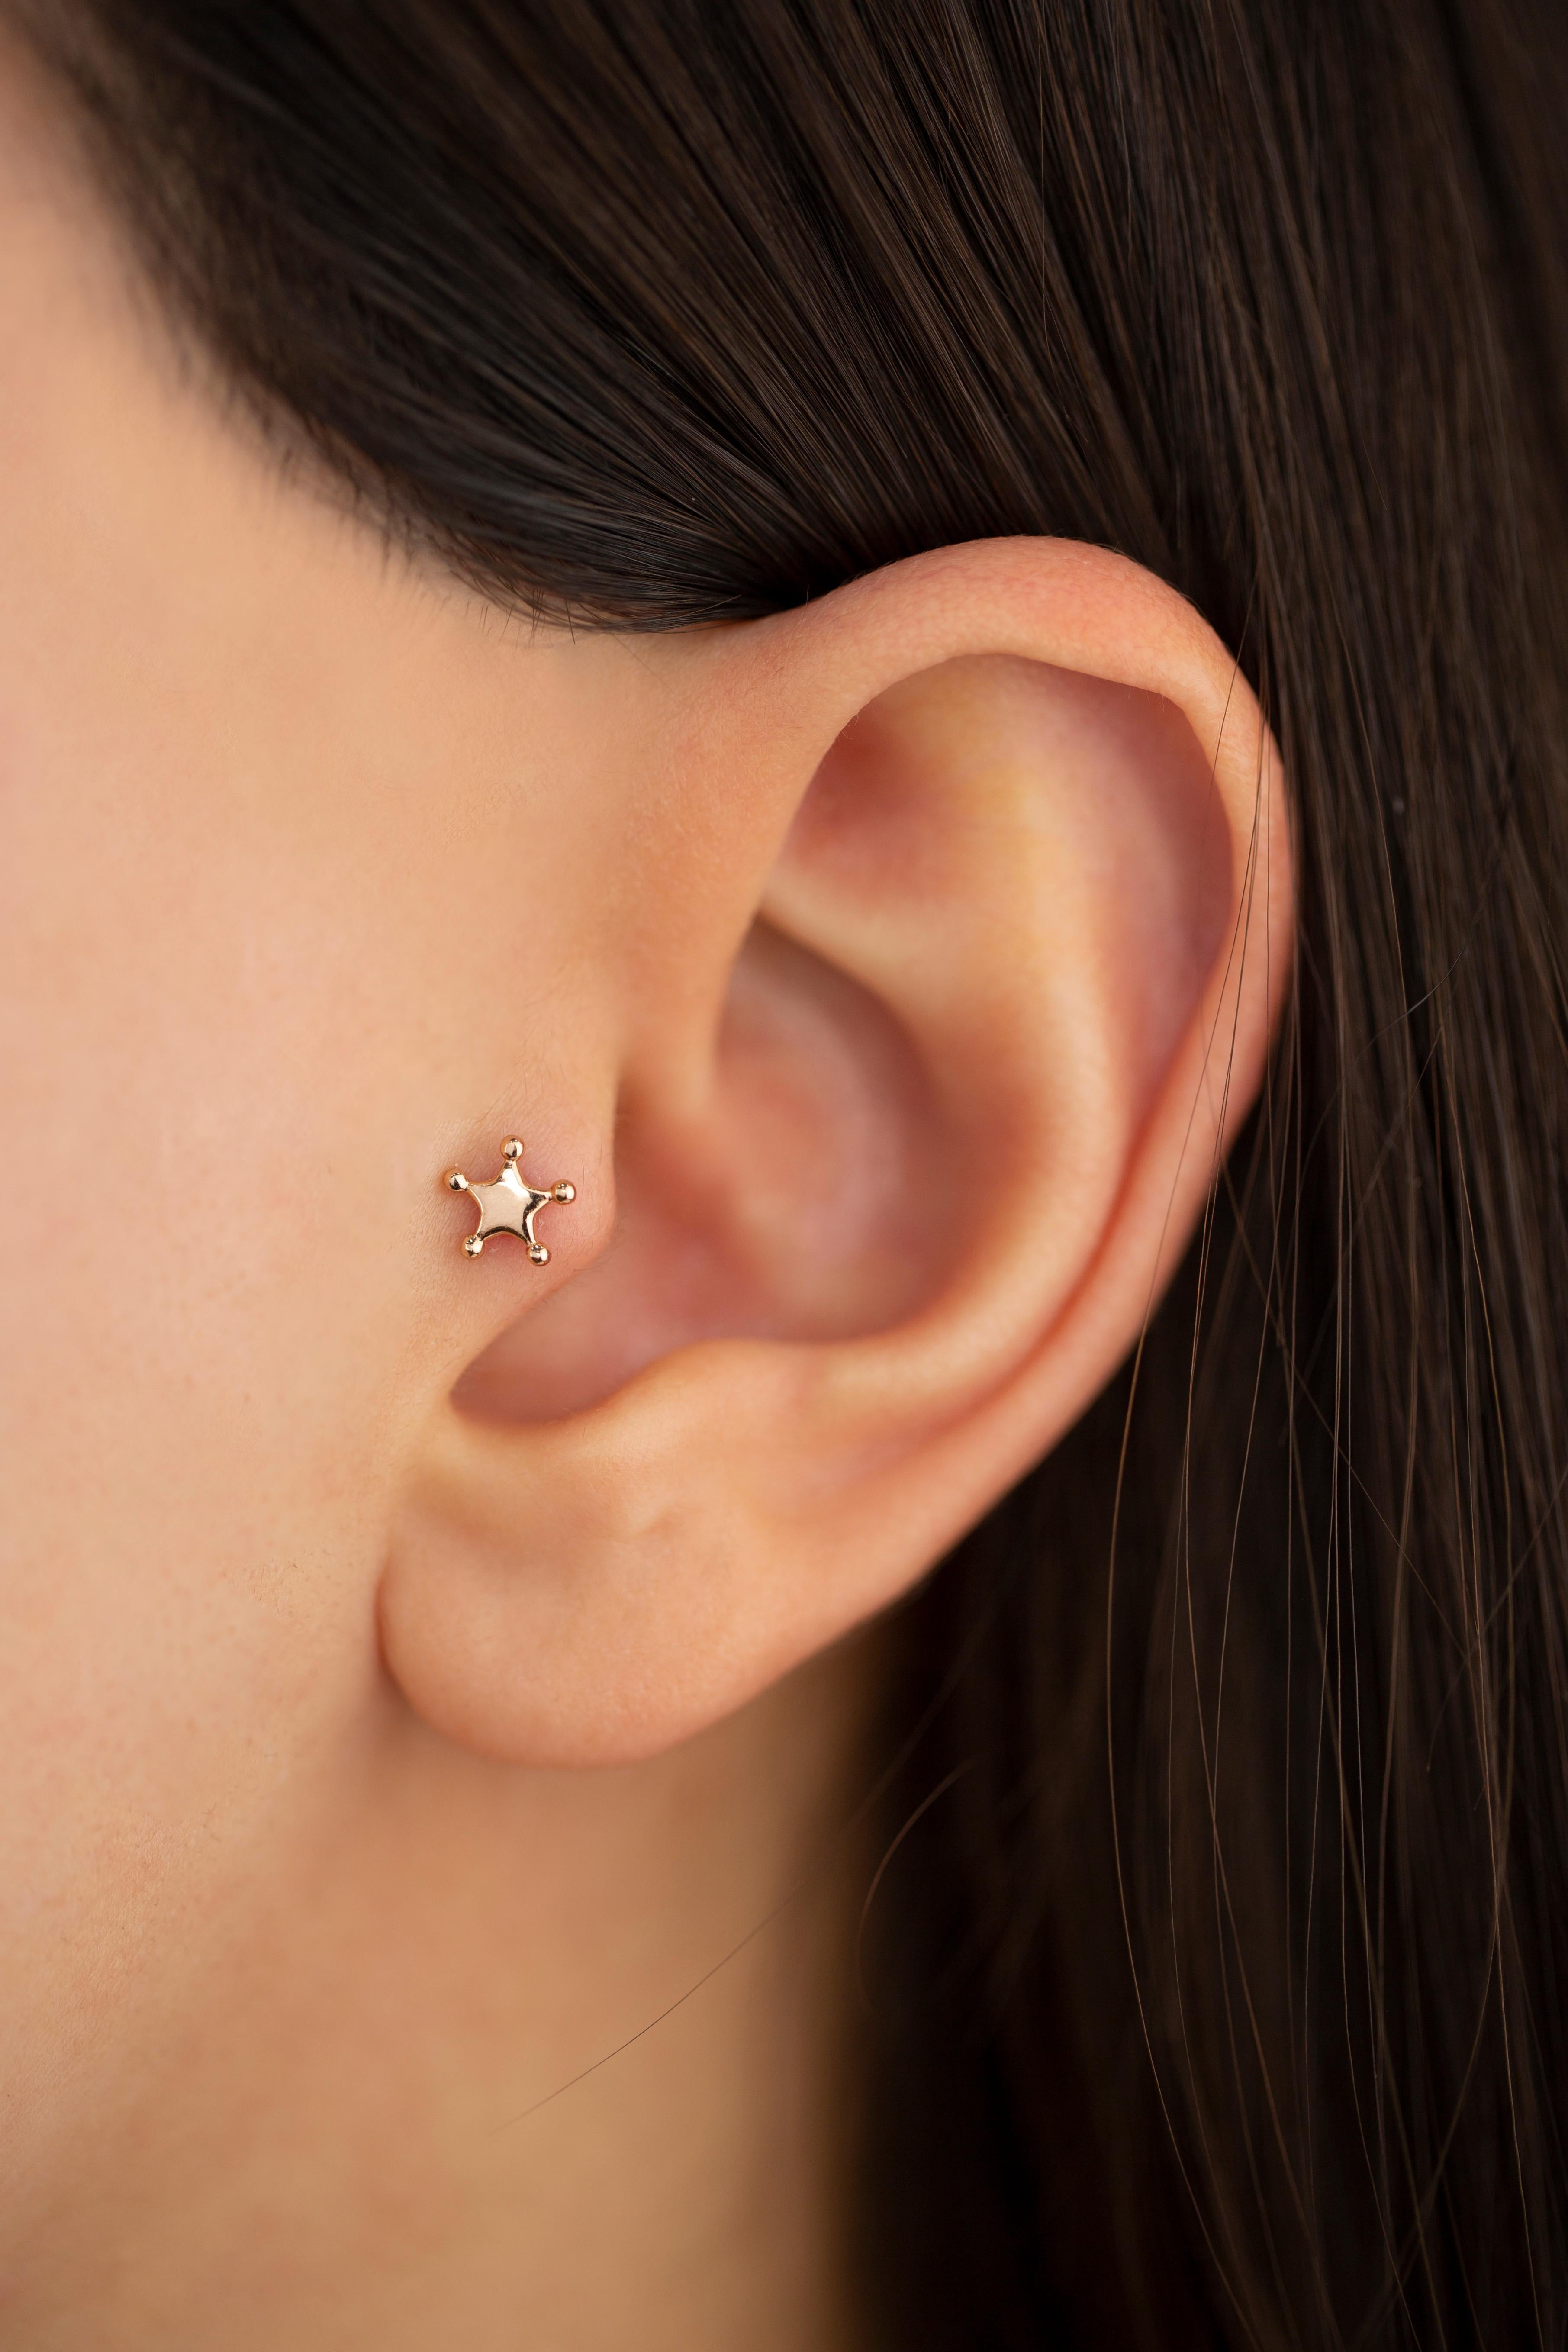 14K Rose Gold Sheriff Star Piercing, Rose Gold Stud Sheriff Badge Earring

You can use the piercing as an earring too! Also this piercing is suitable for tragus, nose, helix, lobe, flat, medusa, monreo, labret and stud.

This piercing was made with